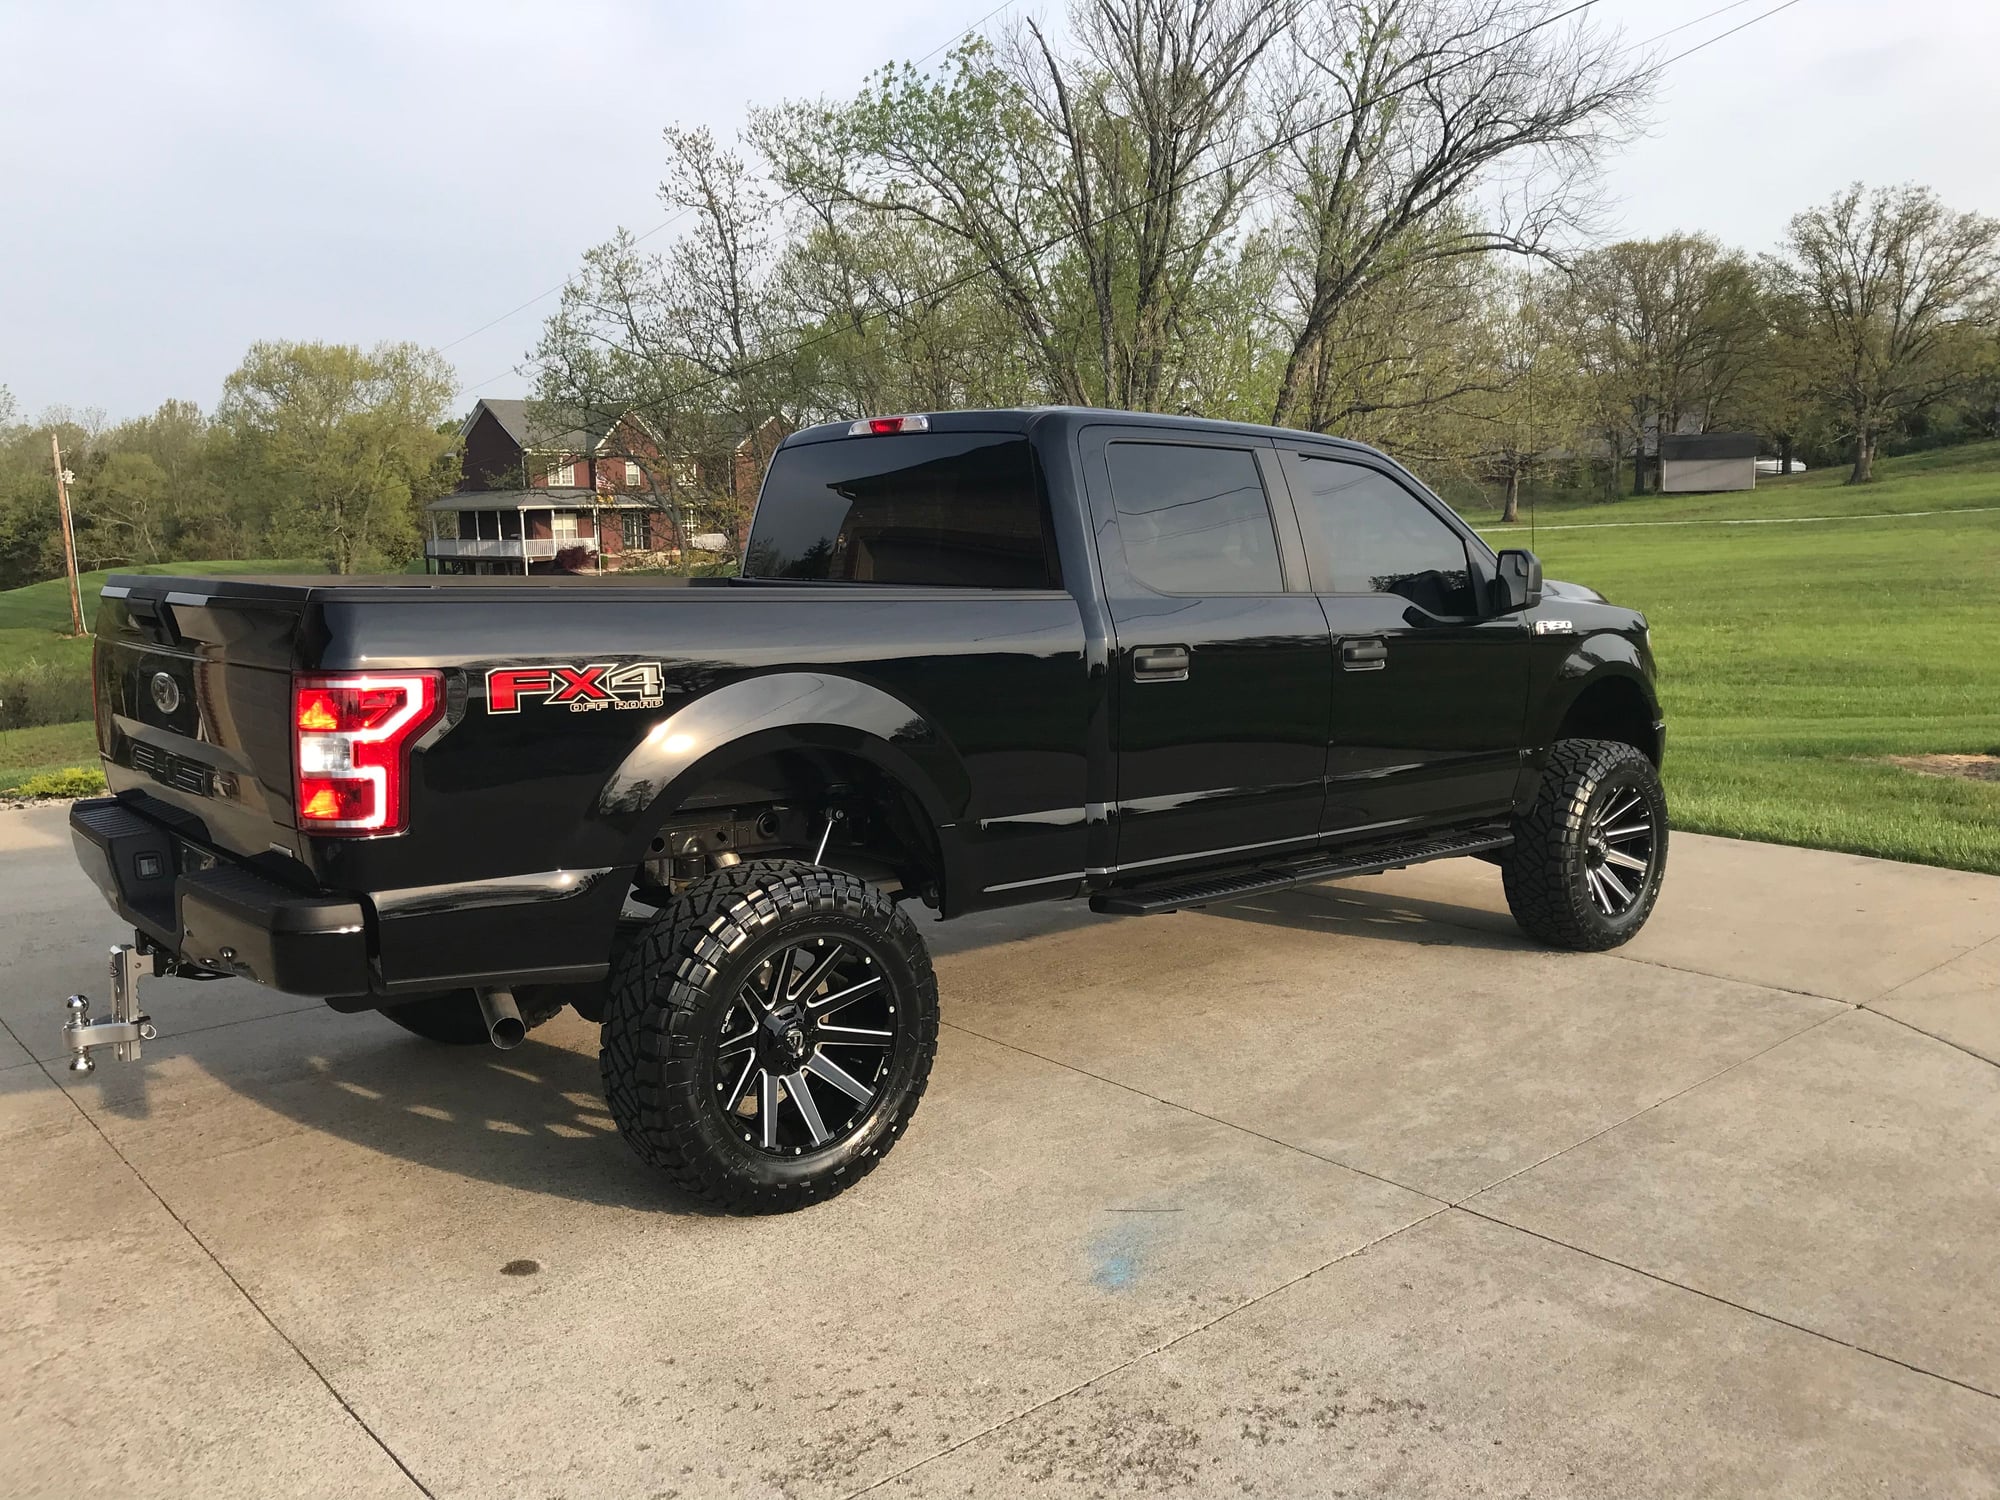 2018 Supercrew 4x4 Lifted, Tires, and more to come - Ford F150 Forum ...